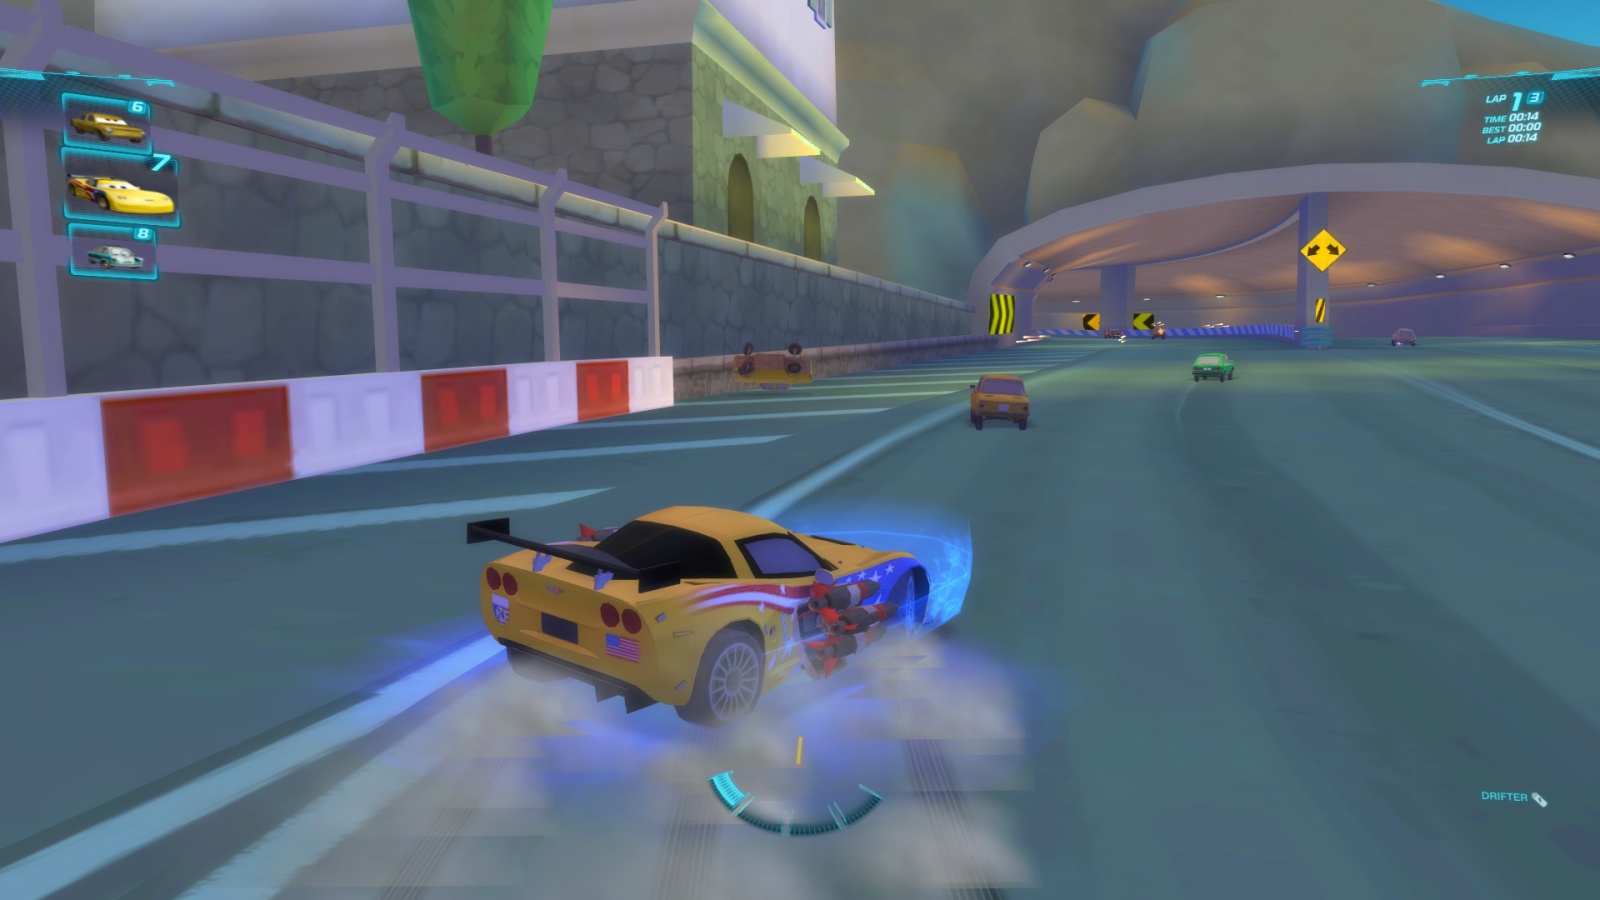 Cars 2 video game download pc free